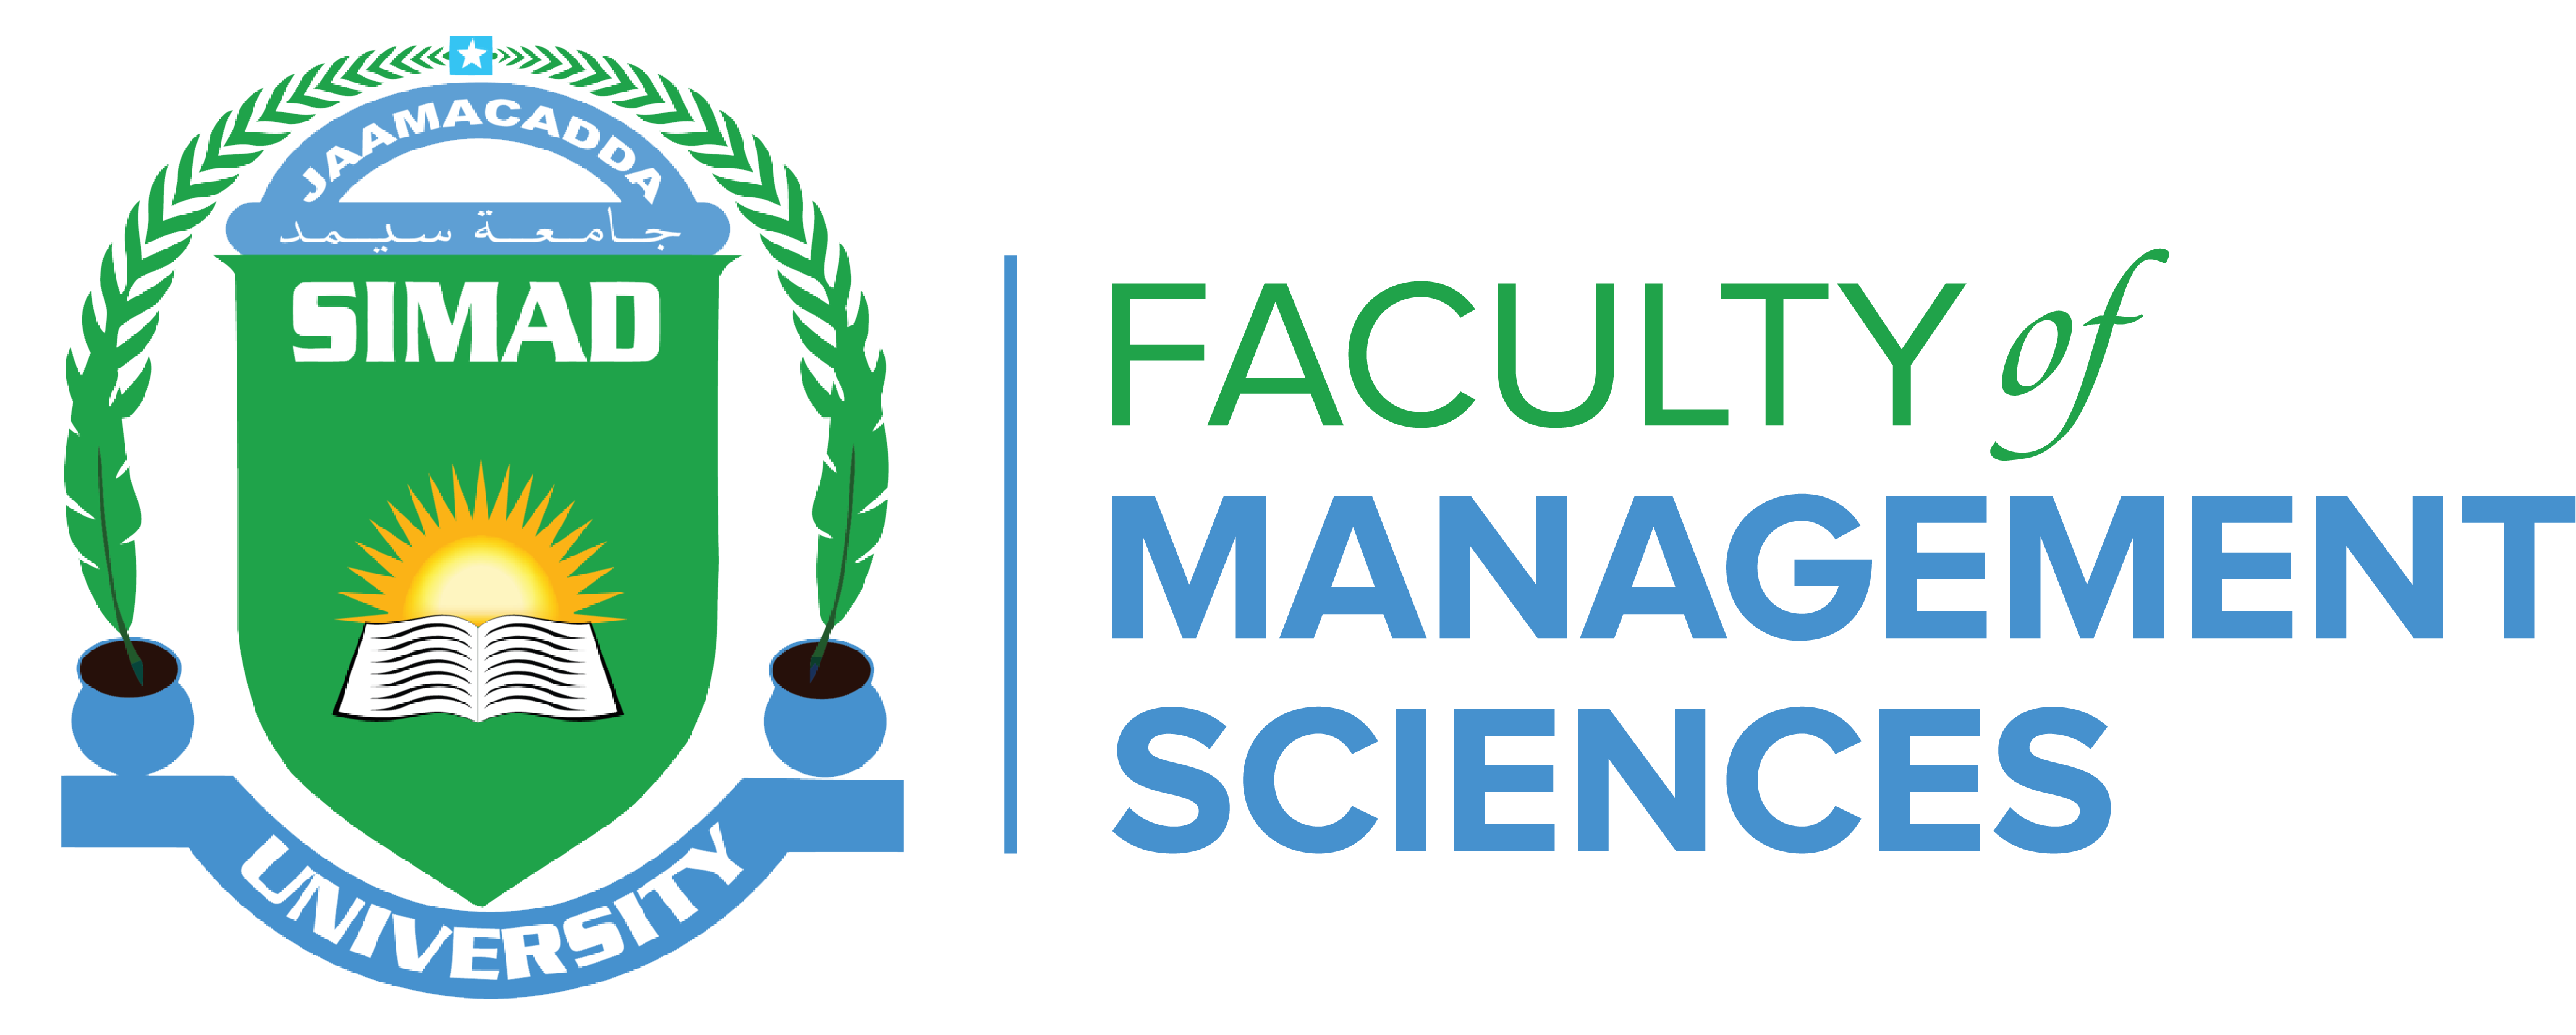 Faculty of Management Sciences Logo